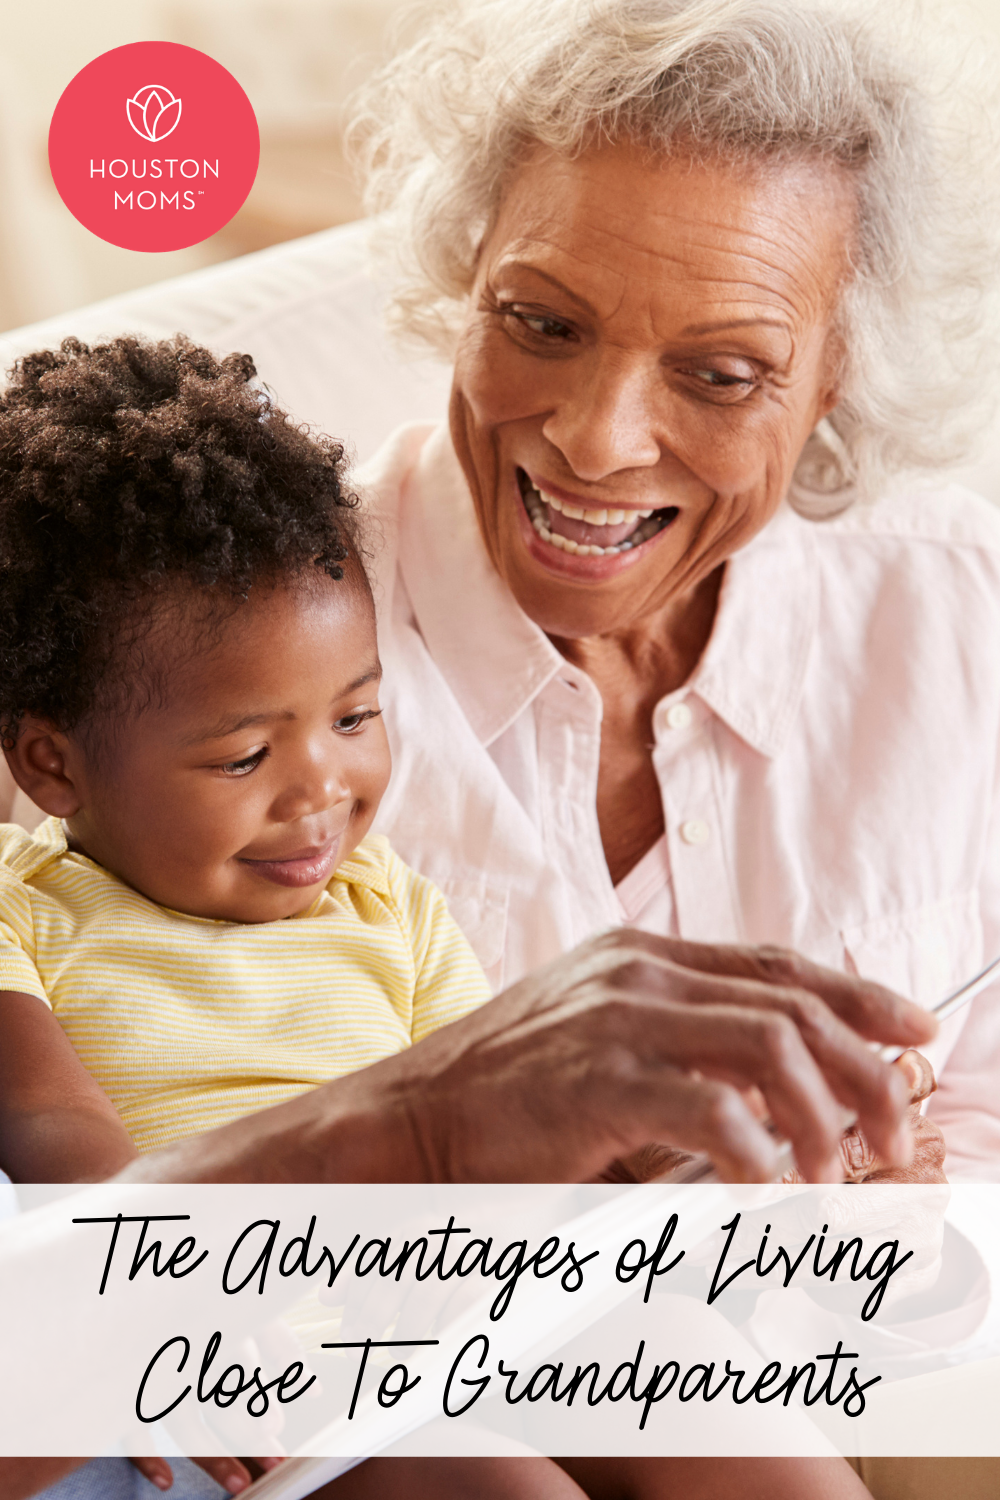 Houston Moms "The Advantages of Living Close to Grandparents" #houstonmoms #houstonmomsblog #momsaroundhouston